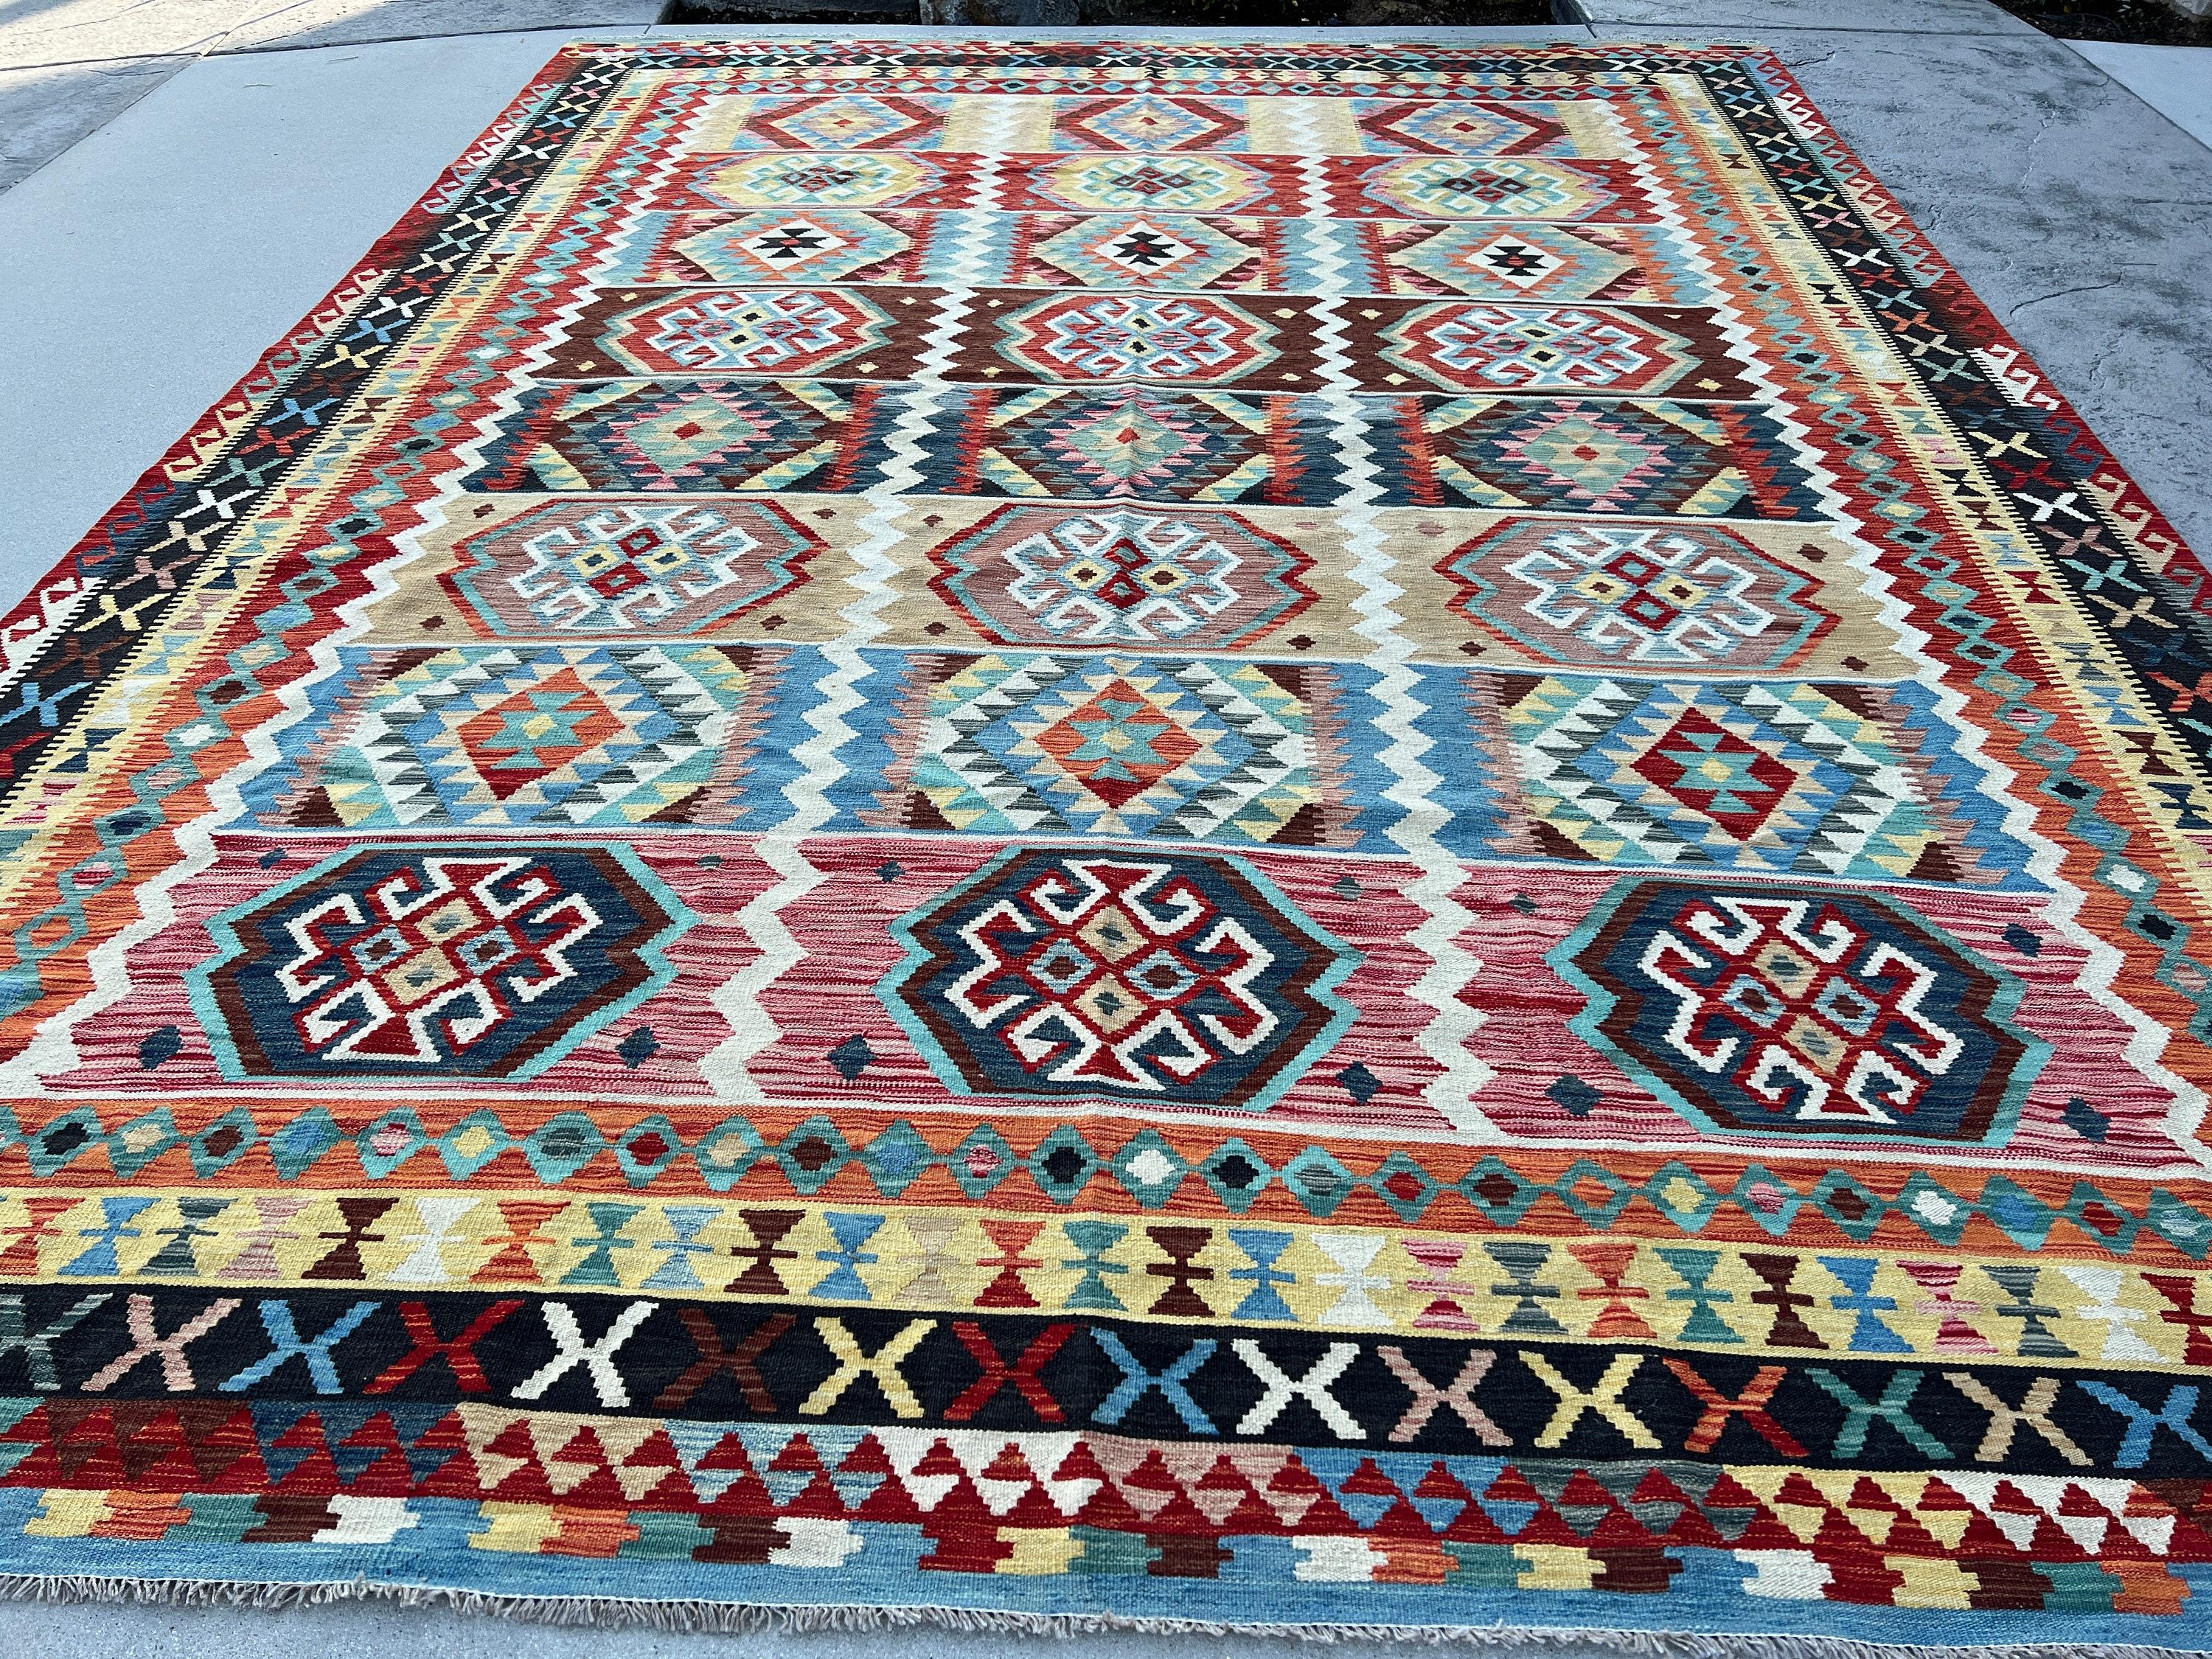 10x13 Hand-Knotted Afghan Kilim Rug Premium Hand-Spun Afghan Wool Fair Trade In New Condition For Sale In San Marcos, CA